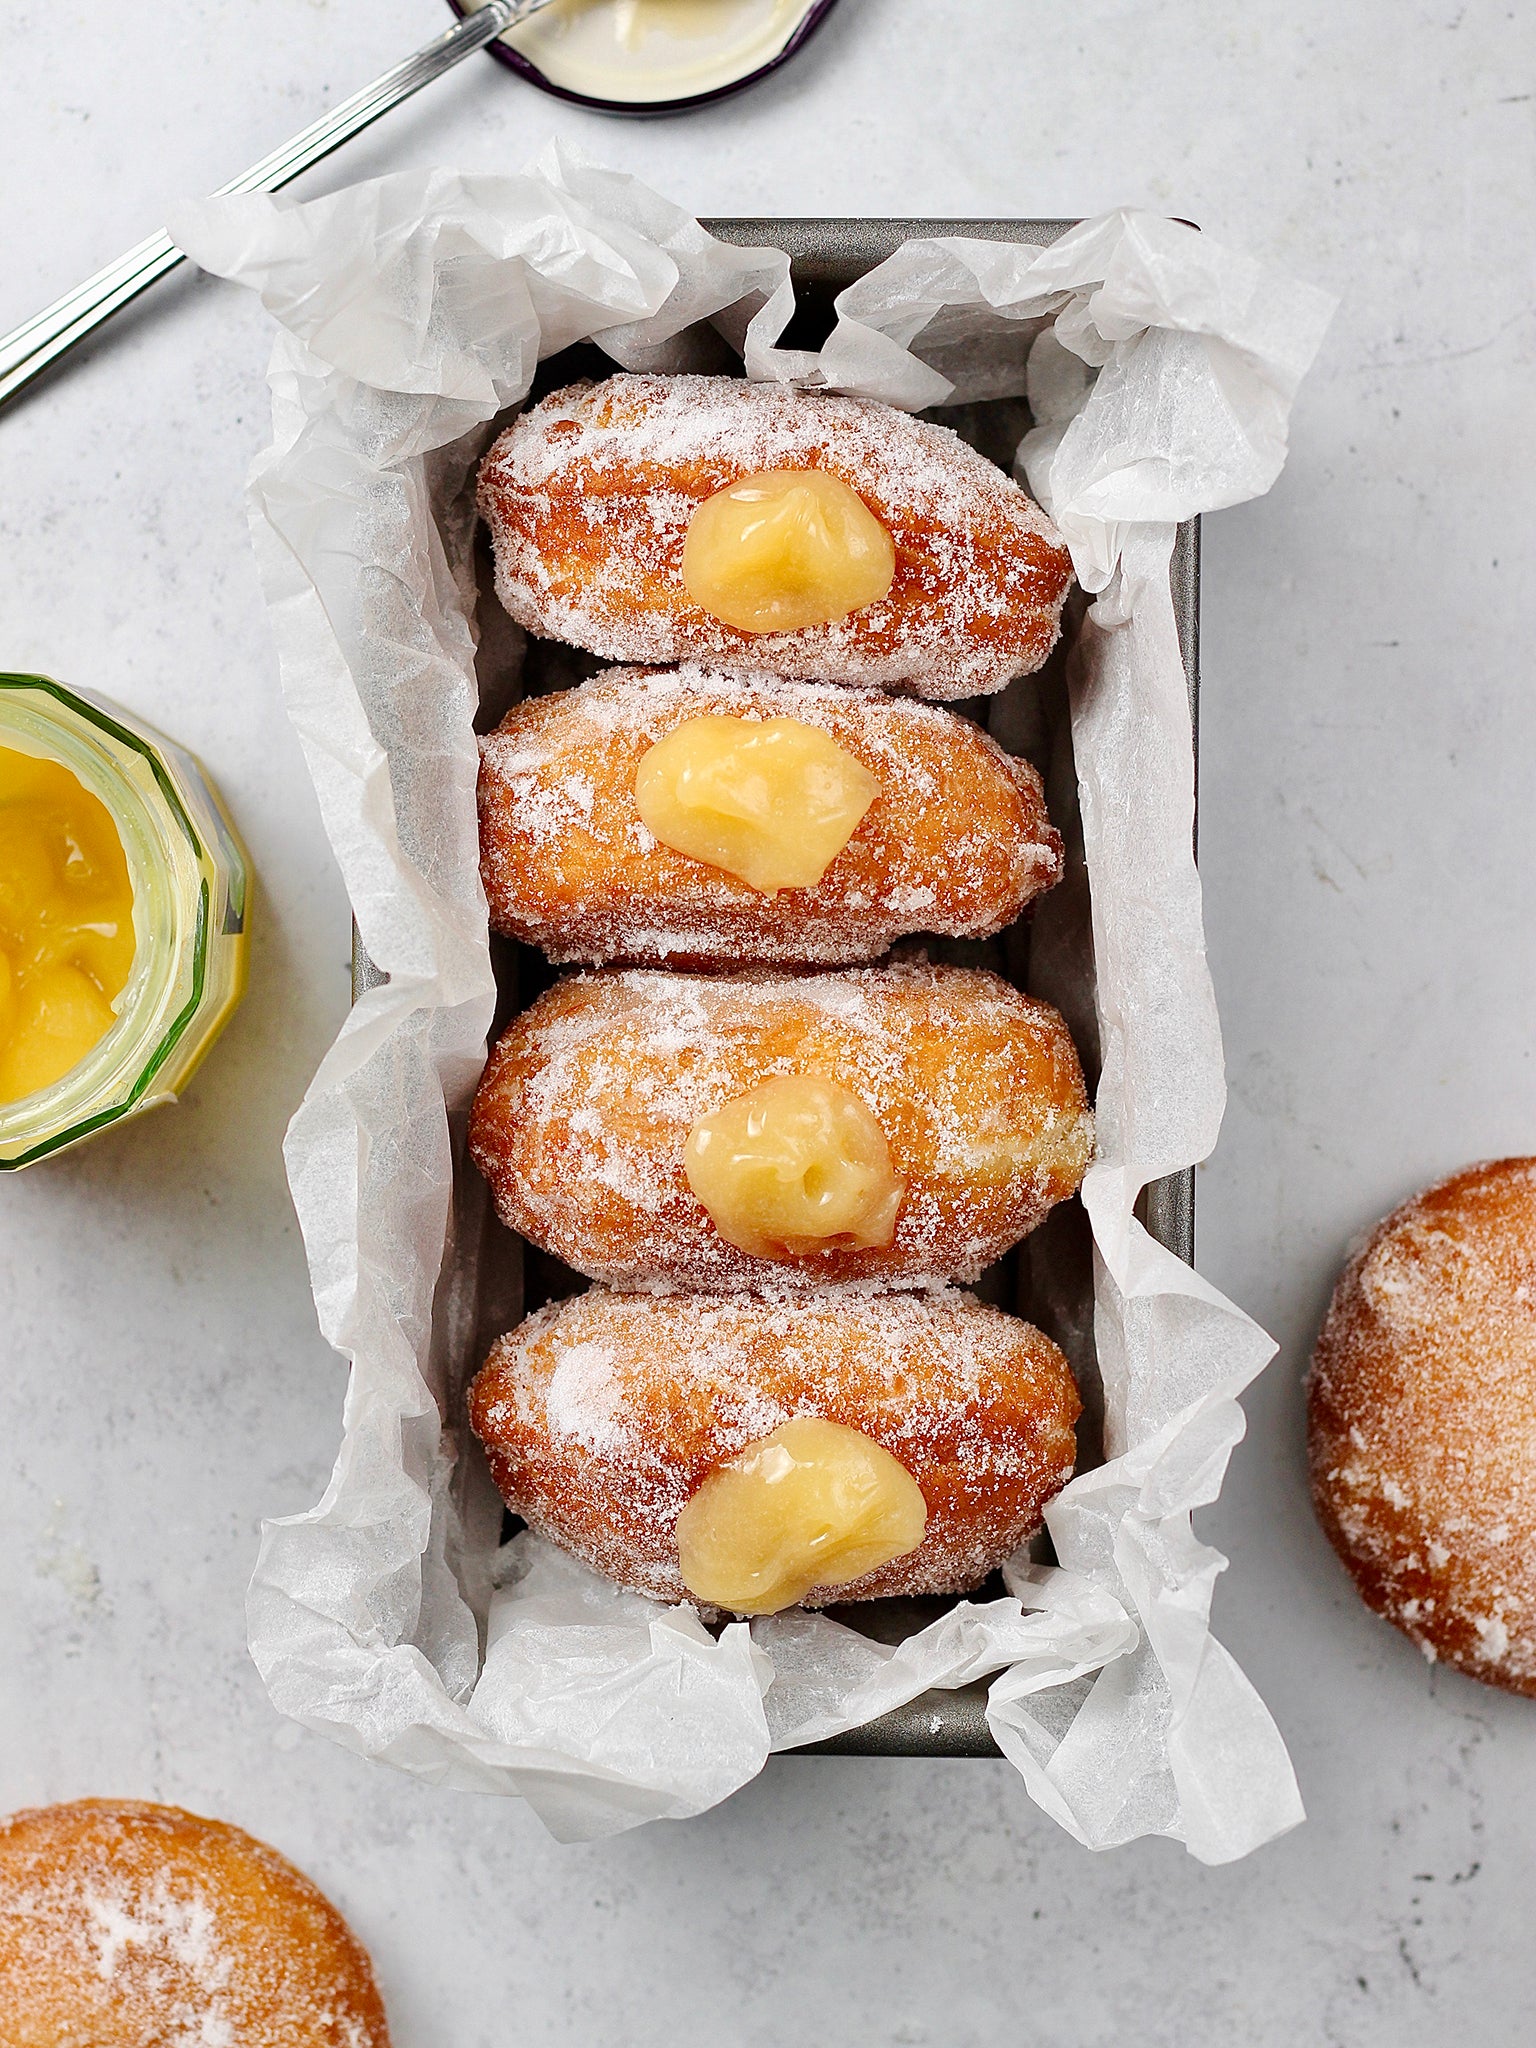 Homemade doughnuts in 30 minutes... say no more